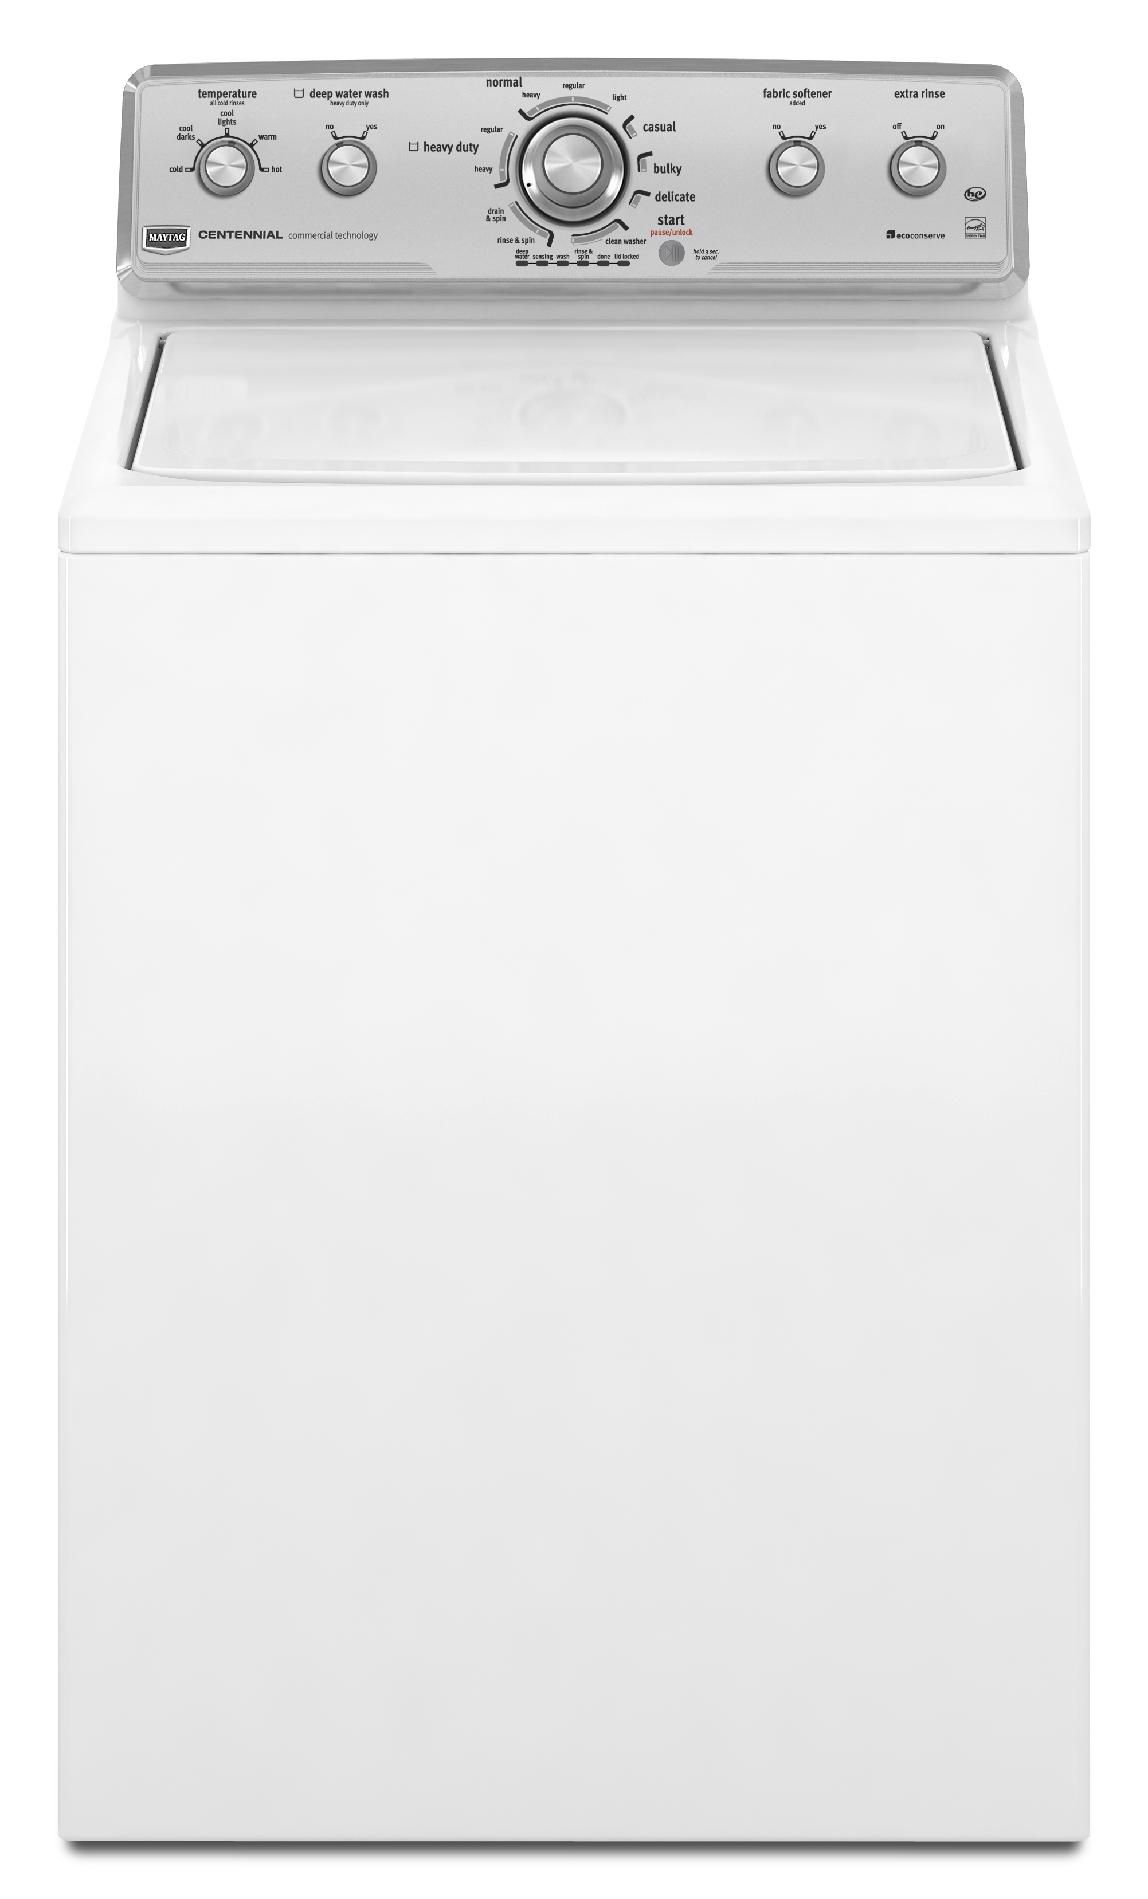 Maytag 3.4 cu. ft. Centennial Top-Load Washer w/ Deep Water Wash - White